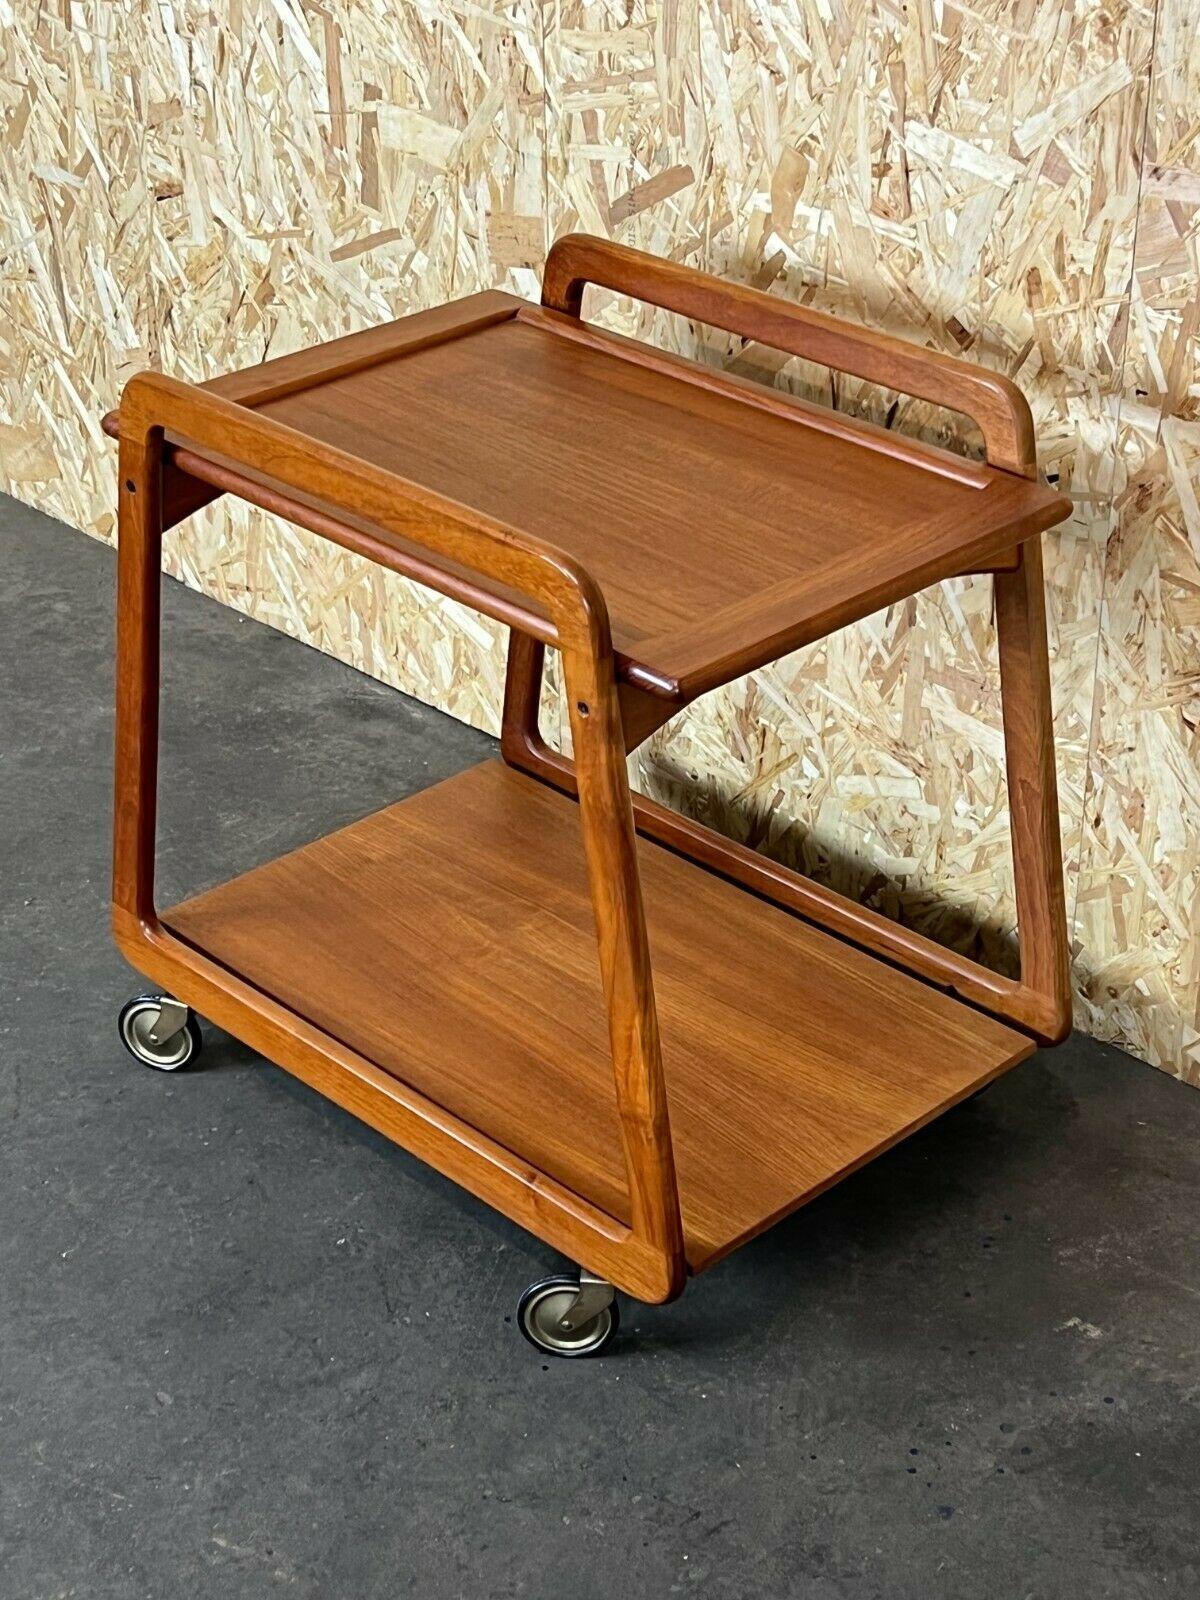 60s 70s teak serving trolley Sika Møbler Danish Design Denmark 60s

Object: Serving trolley

Manufacturer: Sika

Condition: good

Age: around 1960-1970

Dimensions:

66m x 45cm x 64cm

Other notes:

The pictures serve as part of the